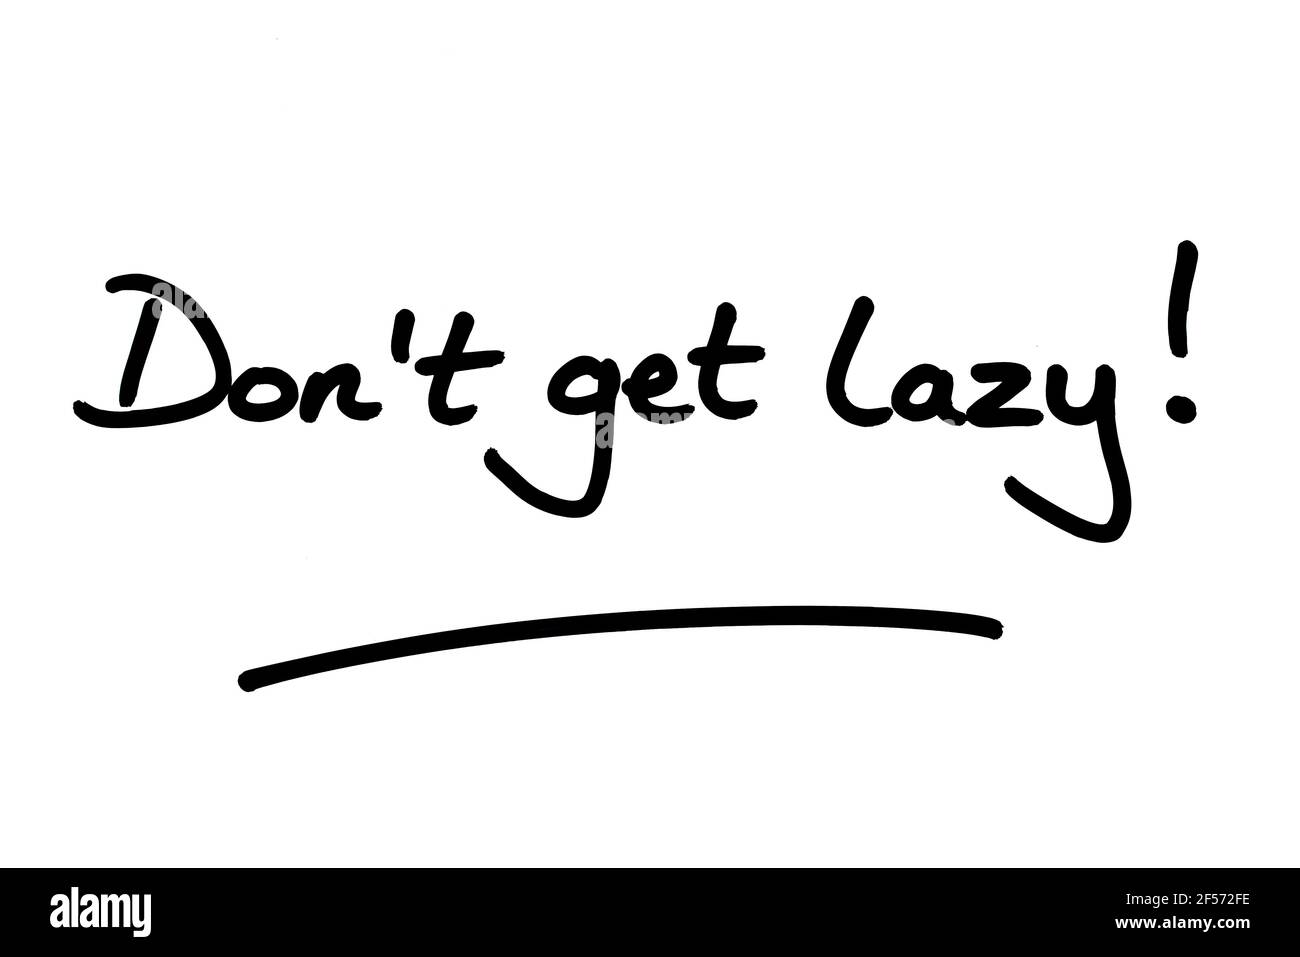 Dont get lazy! handwritten on a white background. Stock Photo